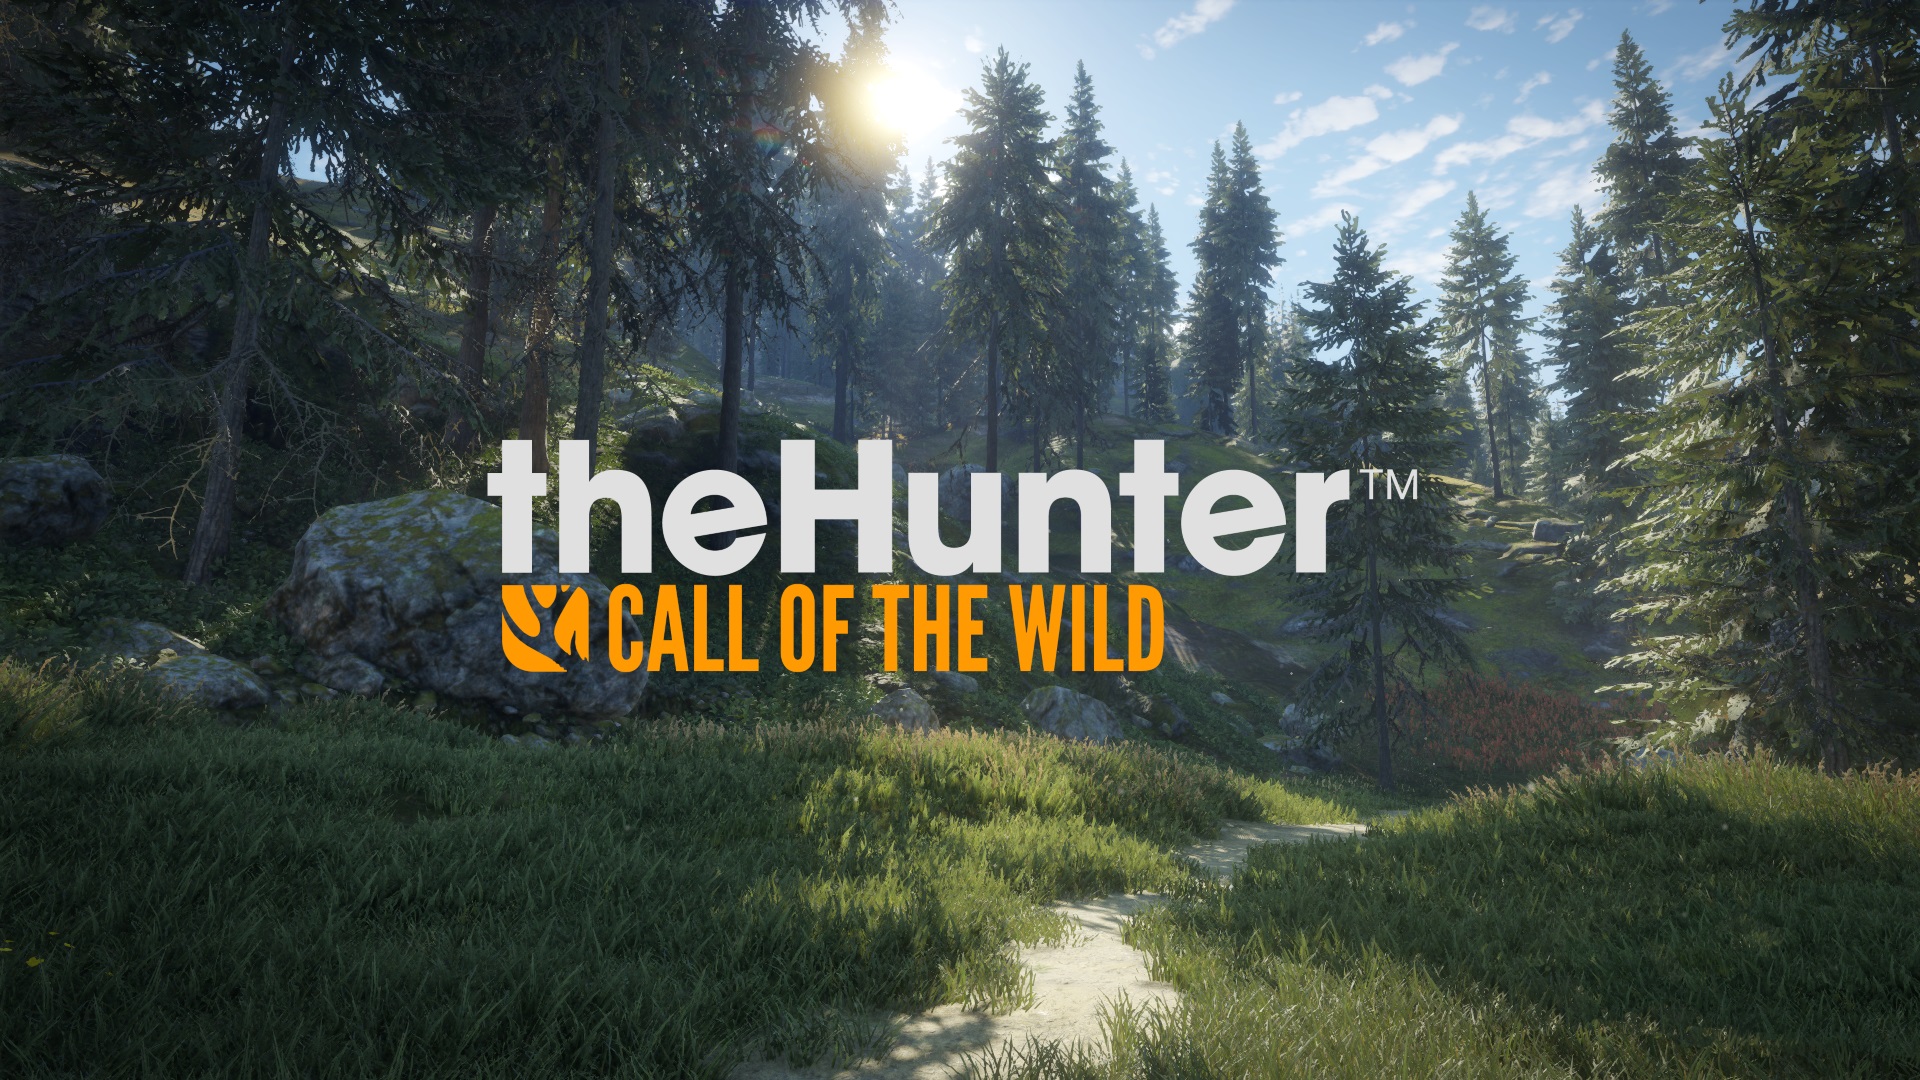 Call of the wild games. Игра the Hunter Call of the Wild. The Hunter Call of the Wild логотип. Игра охота the Hunter Call of the Wild. The Hunter Call of the Wild обои.